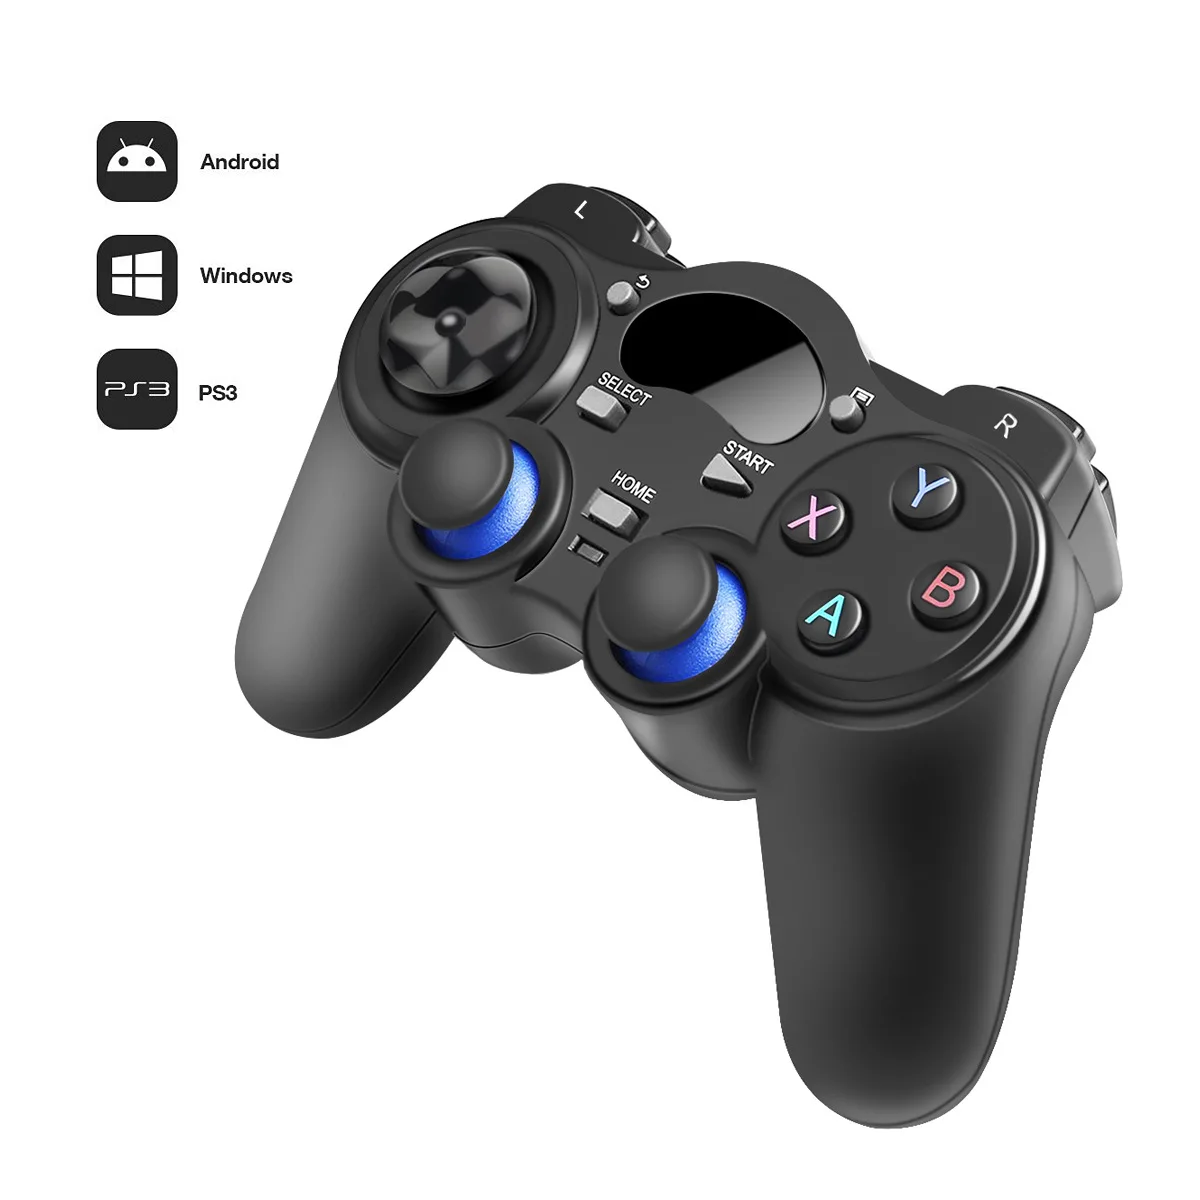 les stormloop doorboren 1pcs Wireless Gamepad Ps3 Controller Joystick For Playstation 3 Game Pad  Joypad Games Accessories - Buy 2.4ghz Wireless Game Controller For Pc Ps2  Ps3,High-sensitivity Motion Control System,2.4 G Ps3 Controller Wireless For